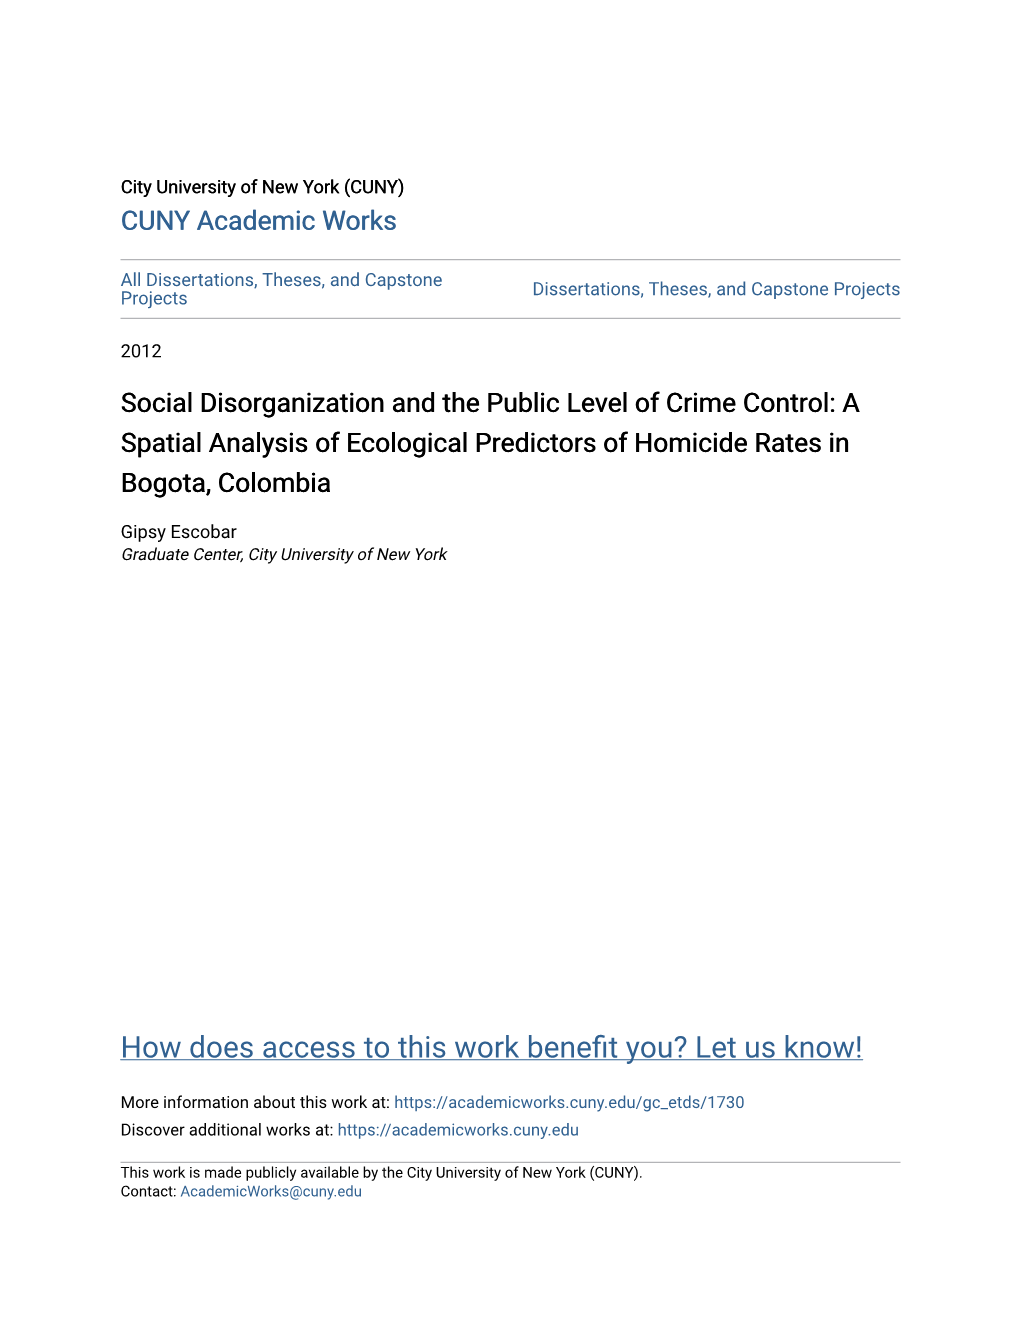 Social Disorganization and the Public Level of Crime Control: a Spatial Analysis of Ecological Predictors of Homicide Rates in Bogota, Colombia